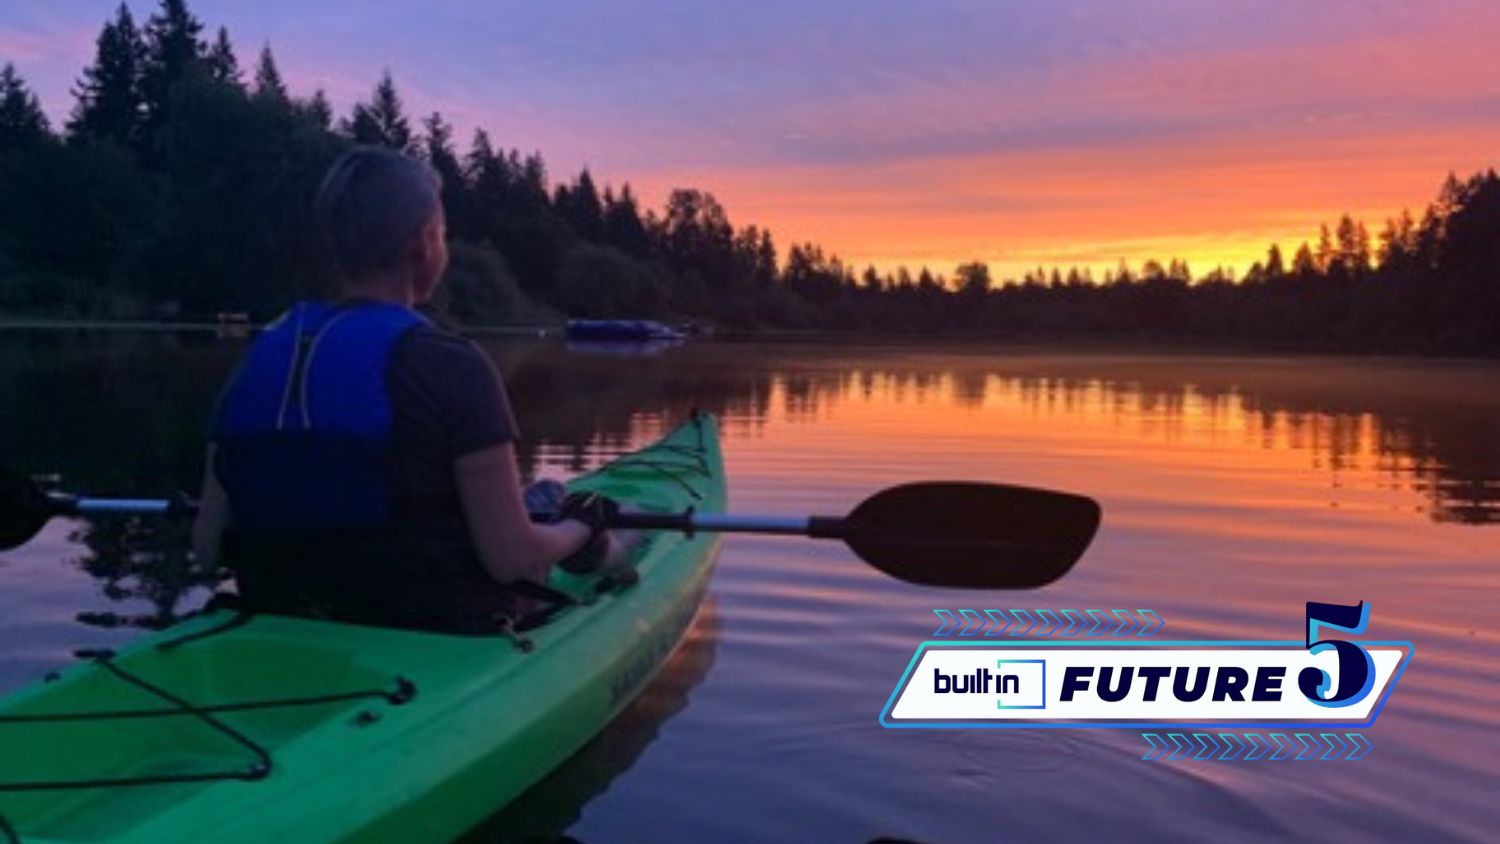 Limitless Guided Visualization's CEO Cali Chill in a kayak at sunset